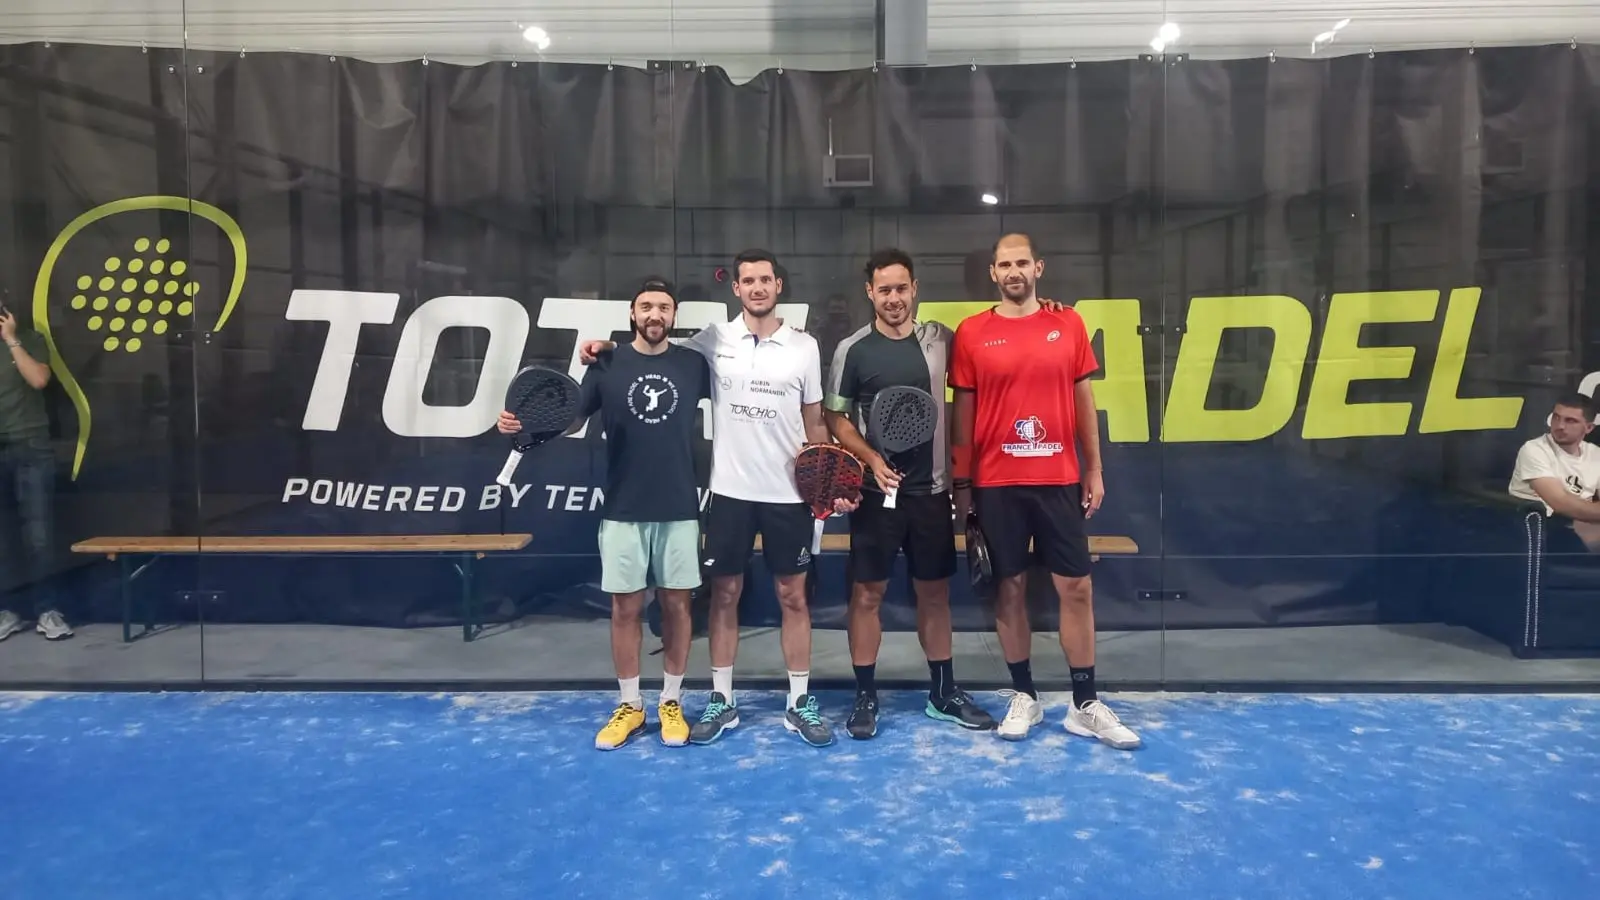 P1500 Jarville by Total Padel – The outsiders sneak into the final